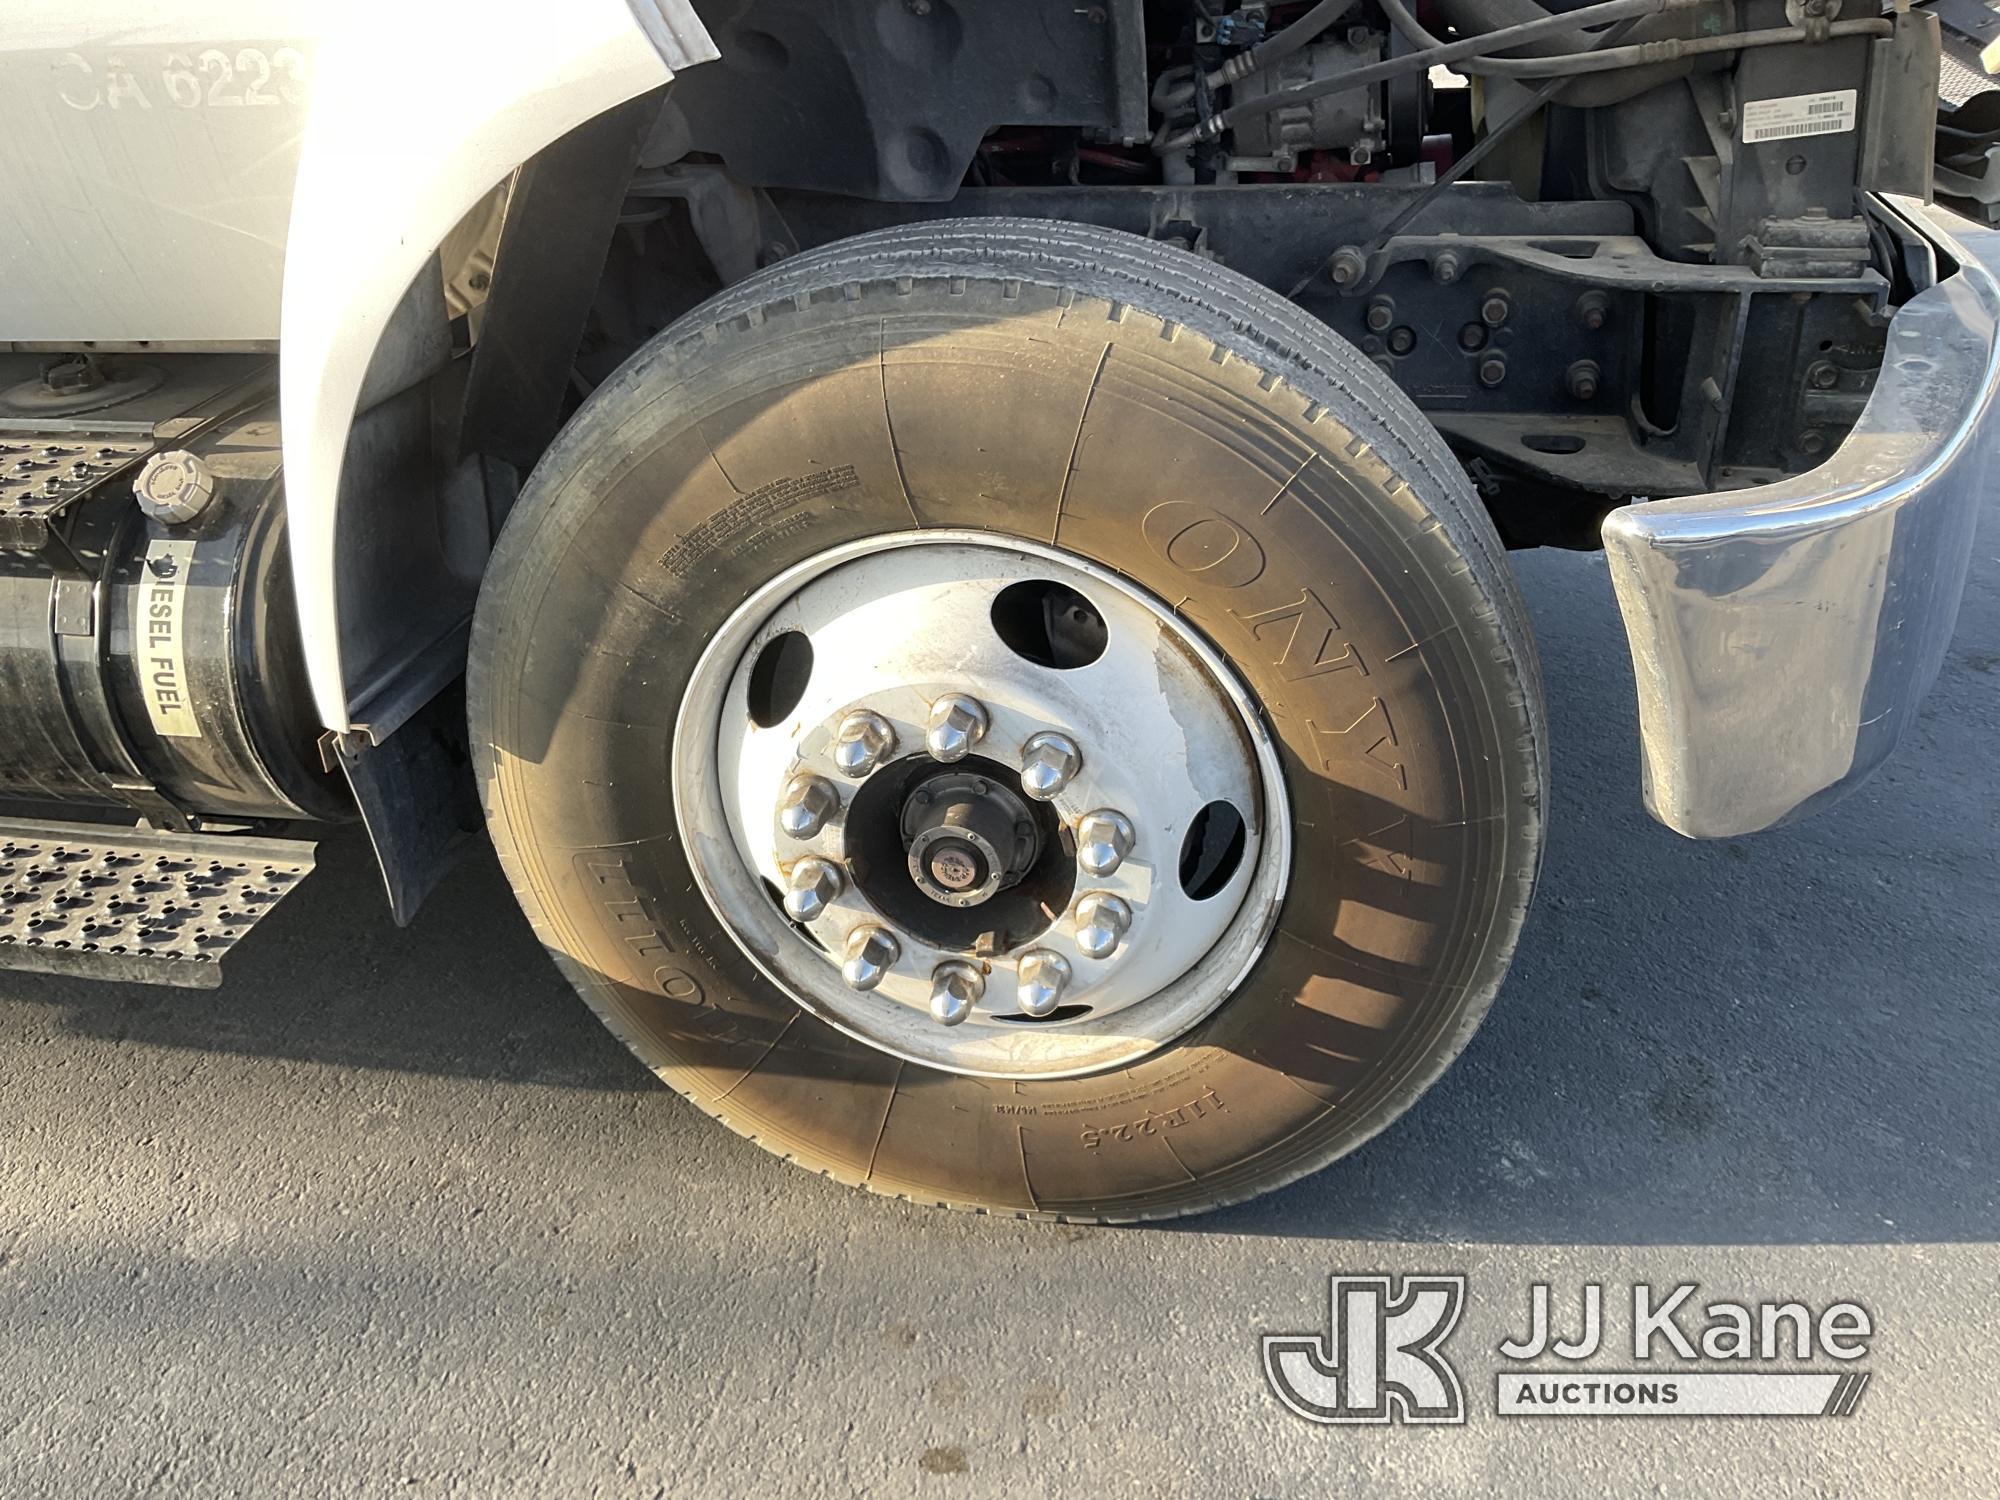 (Jurupa Valley, CA) 2010 Ford F650 Van Body Truck Runs & Moves, Must Be Registered Out Of State Due